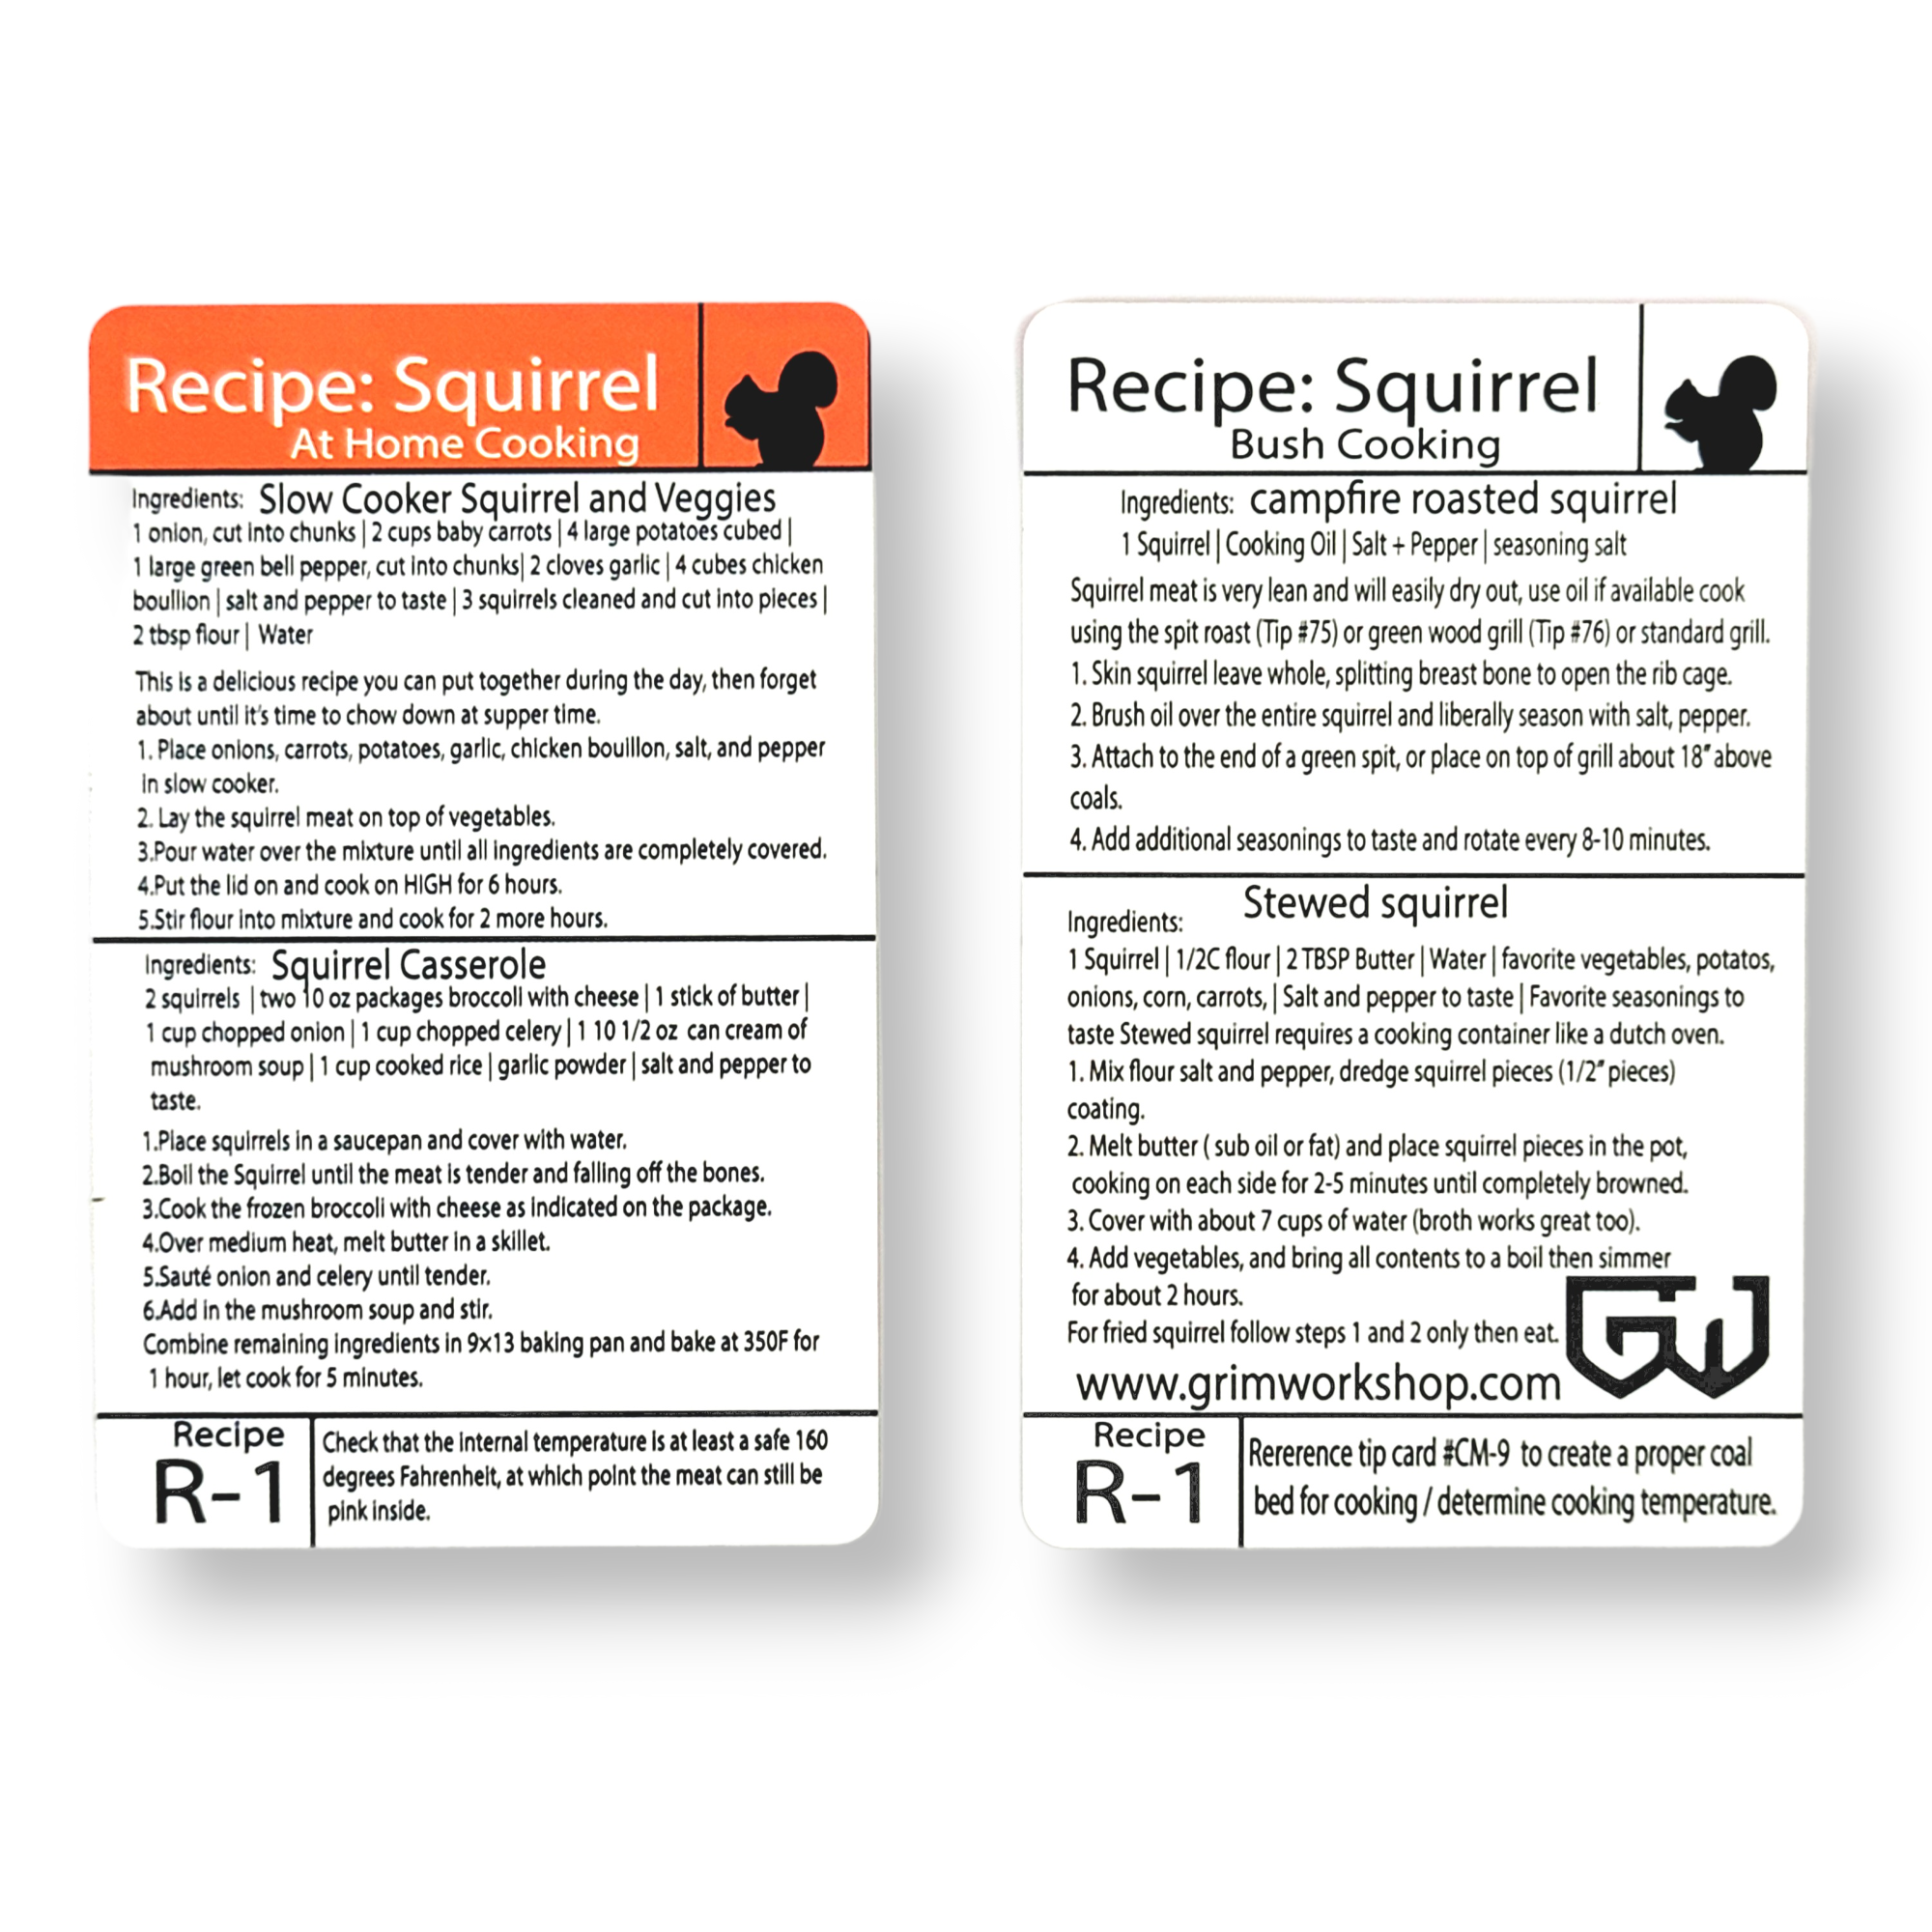 Tip Card R-1: How to Cook Squirrel Recipies